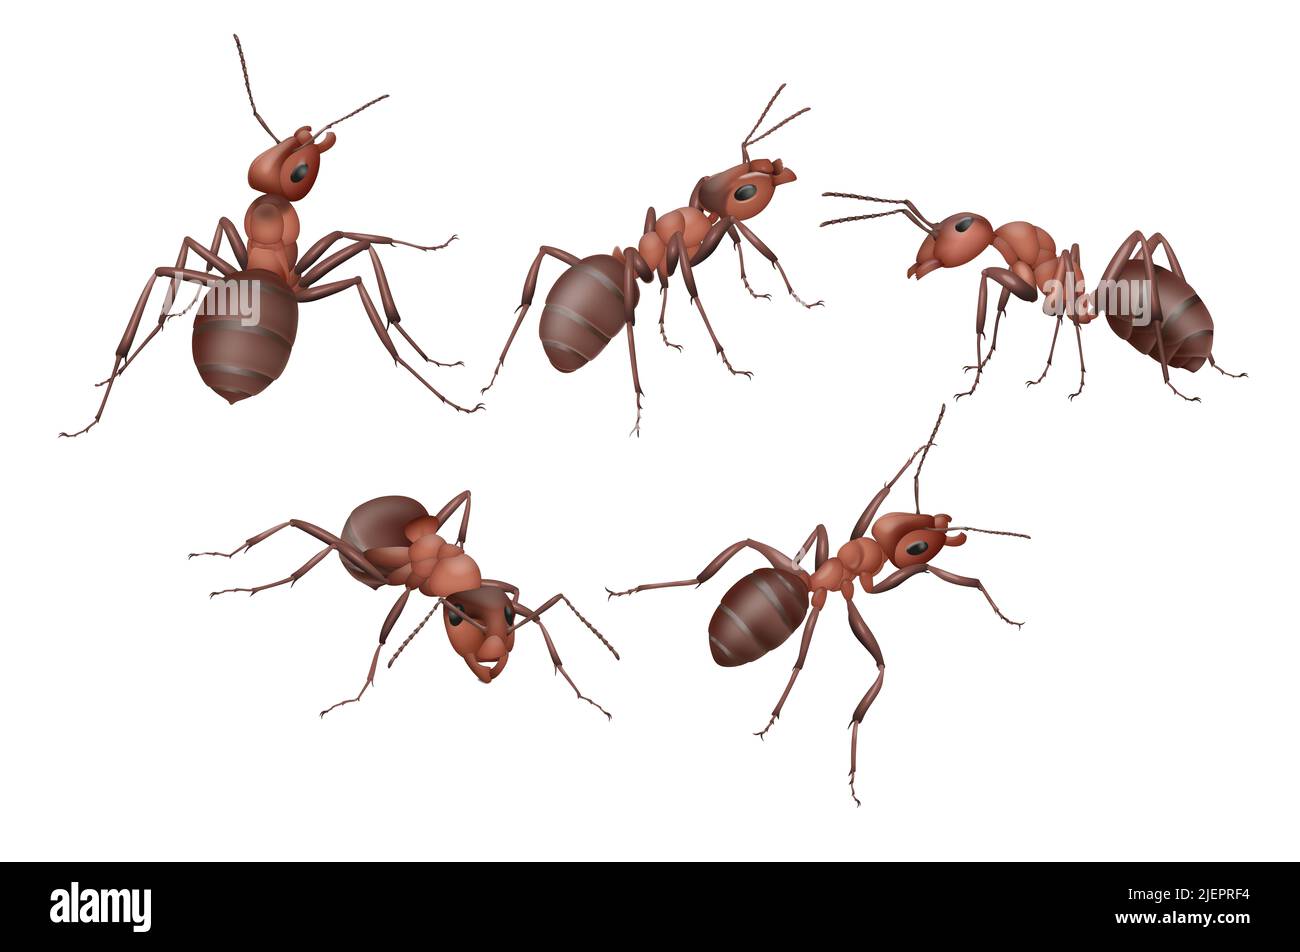 Illustration of ant workers on a white background Stock Photo